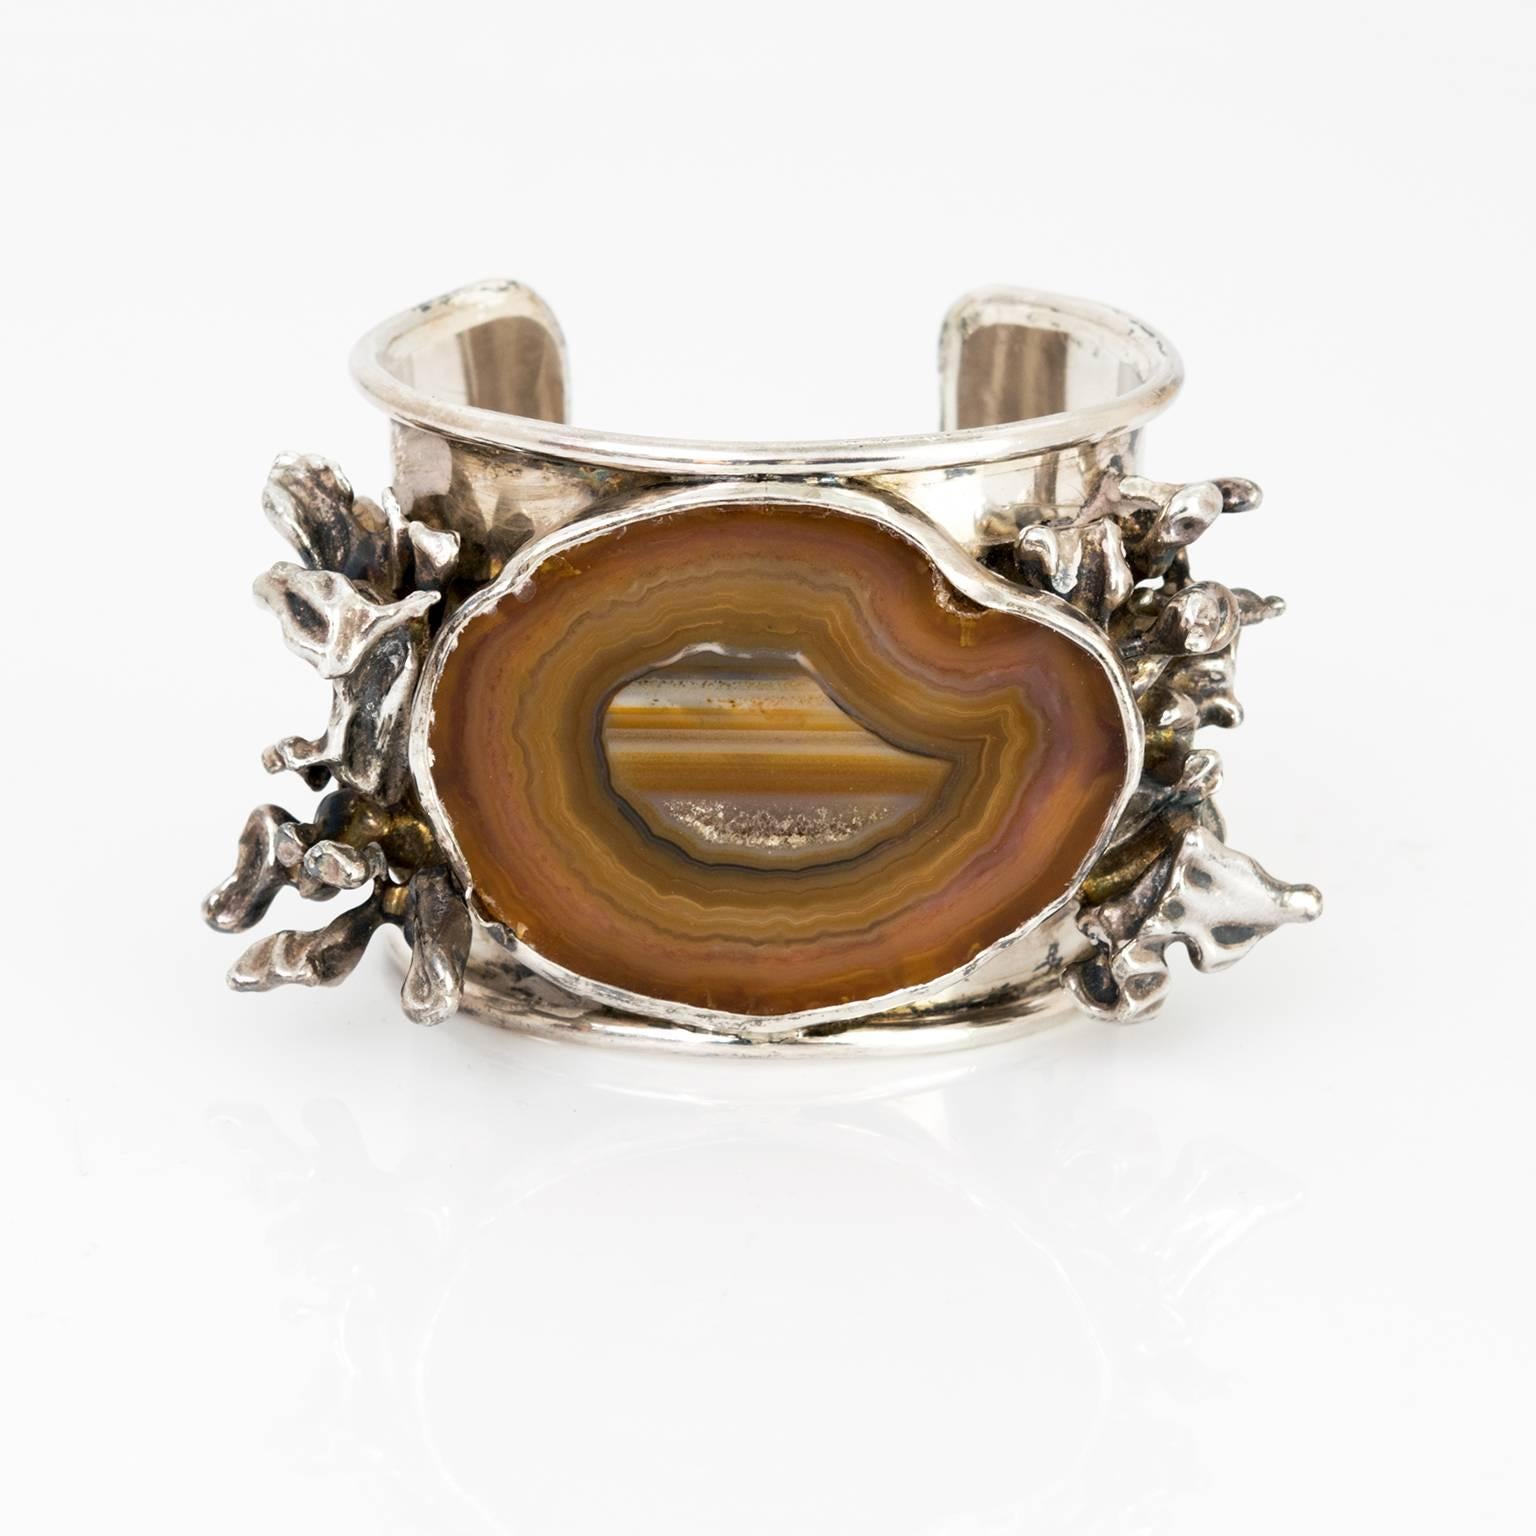 A dramatic silver armband bracelet with a large agate cartouche. Made in London, 1974, marked.